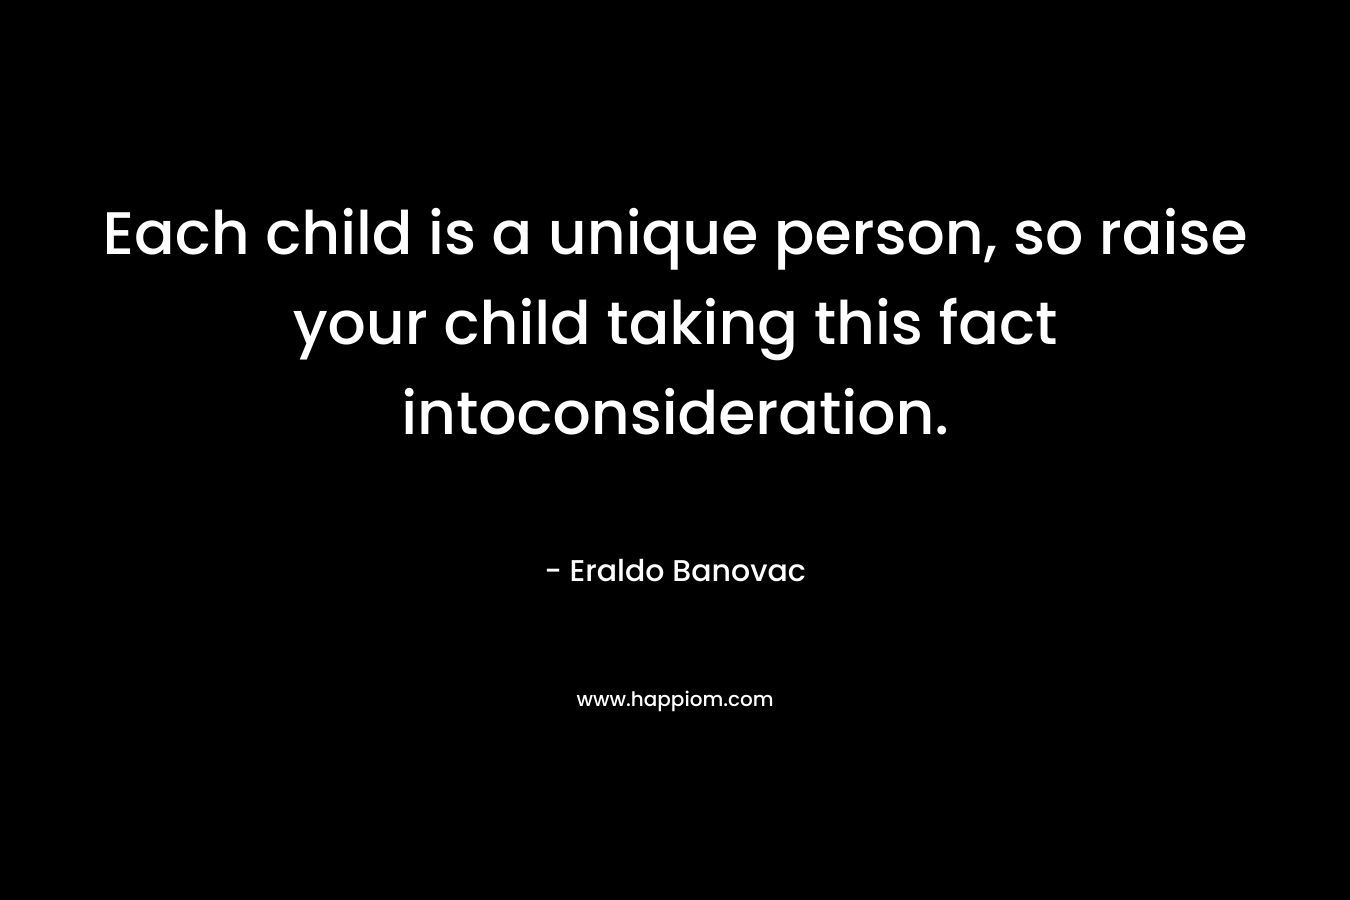 Each child is a unique person, so raise your child taking this fact intoconsideration.